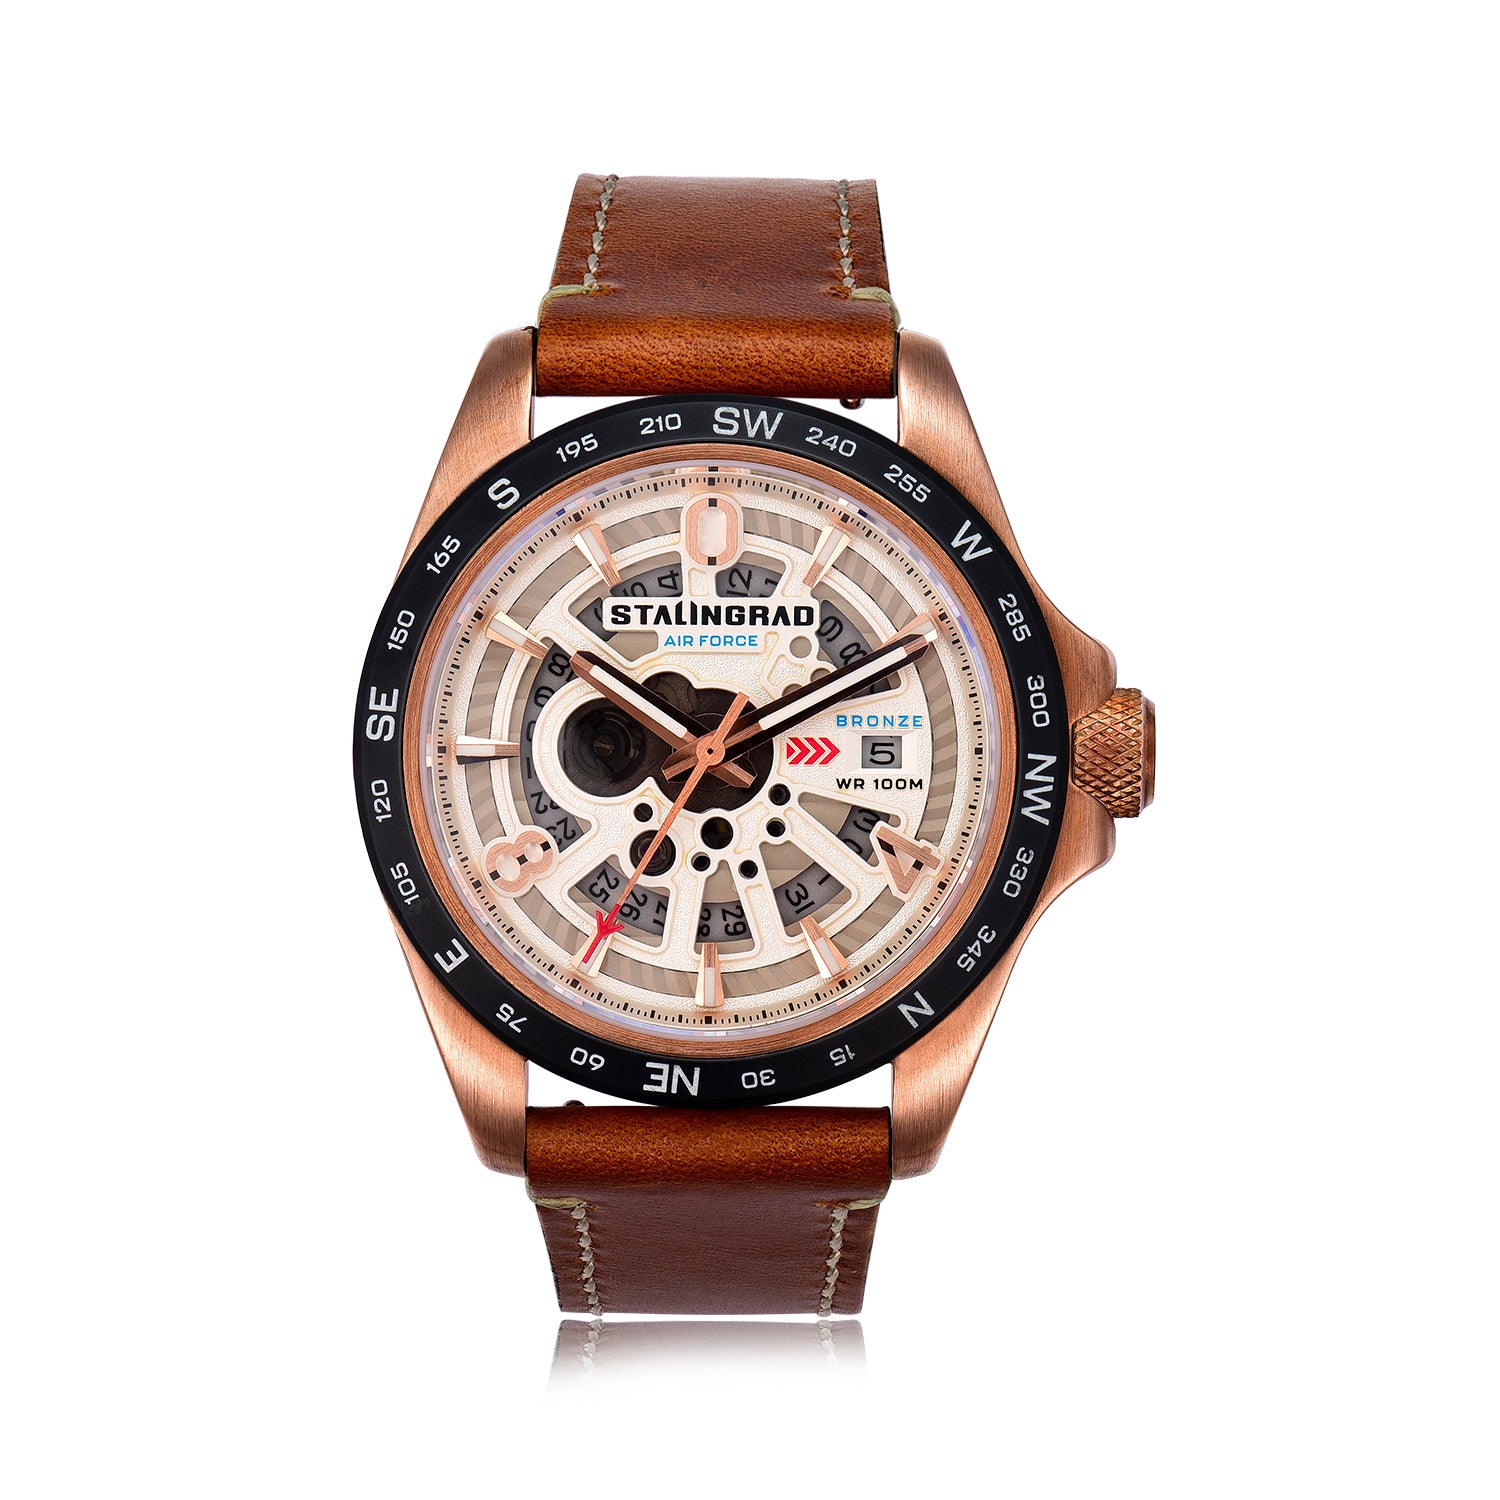 Stalingrad Mikoyan Watch Bronze Case  with a White dial, a compass Bezel and a seethrough dial to the date window with a tan leather strap on a white background